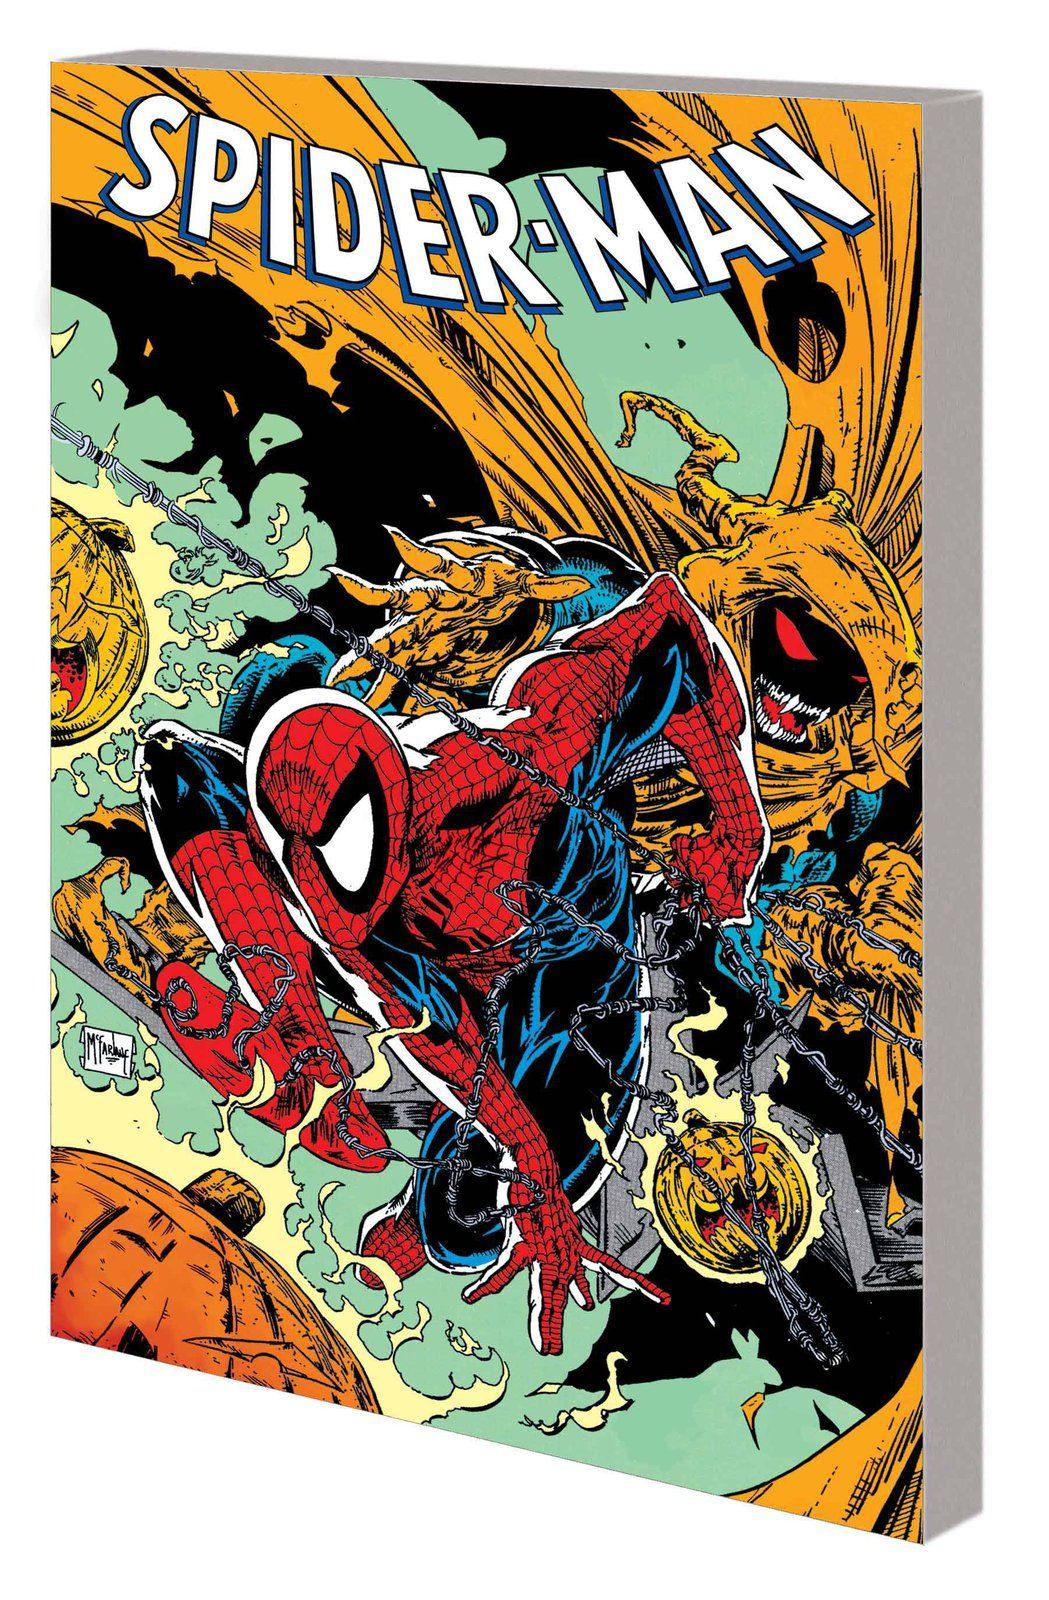 SPIDER-MAN BY TODD MCFARLANE COMPLETE COLLECTION TP (SHIPS 02-24-21) - PCKComics.com